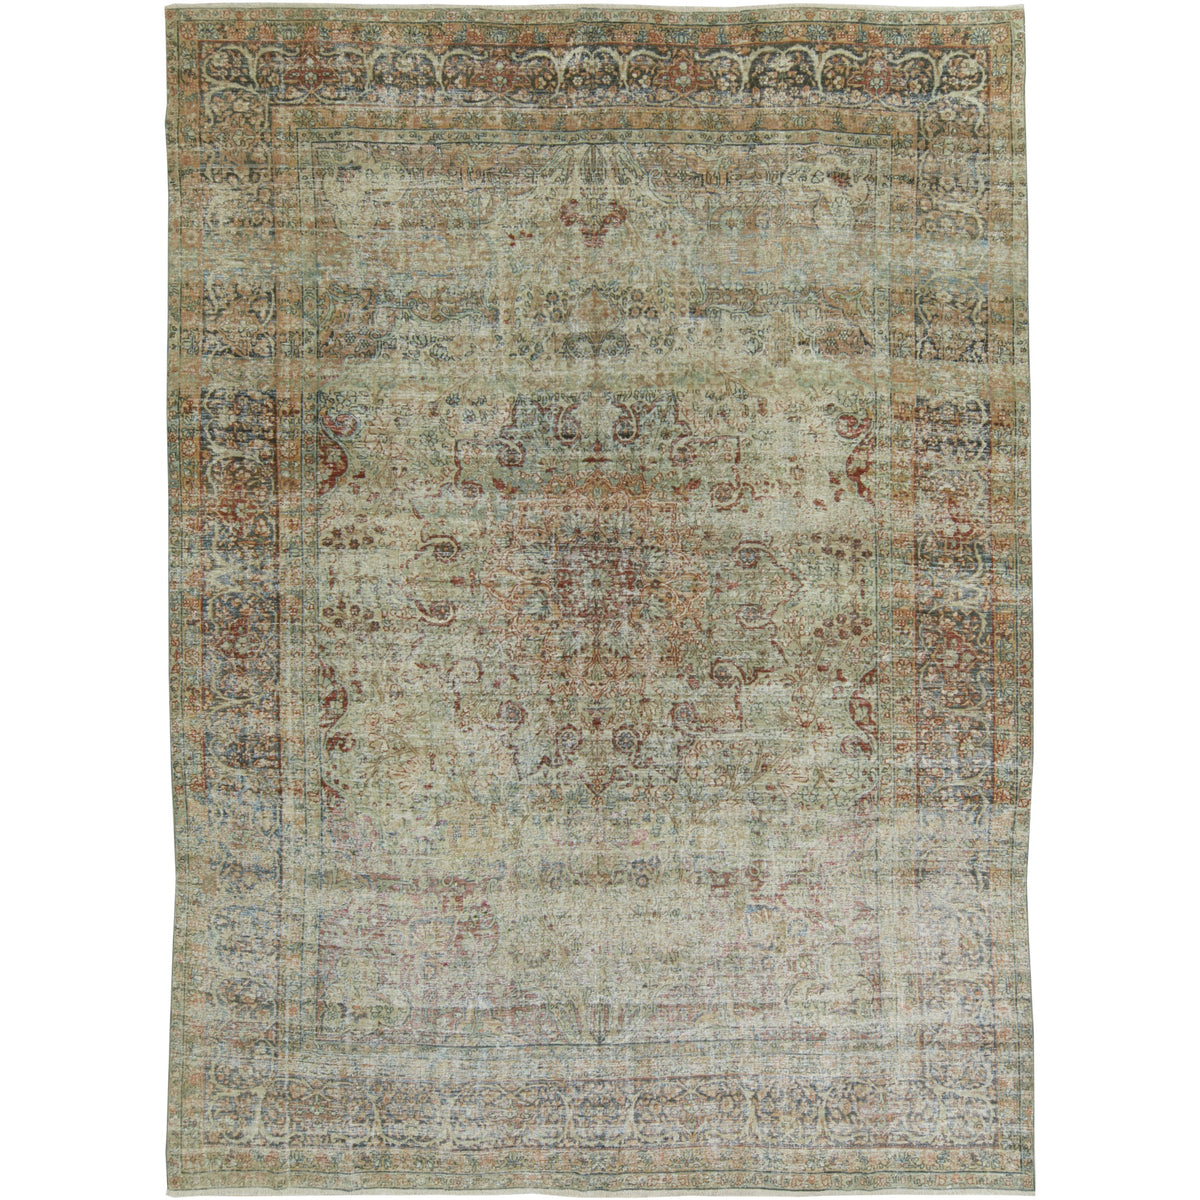 Nevina | Excellence in Every Knot | Kuden Rugs